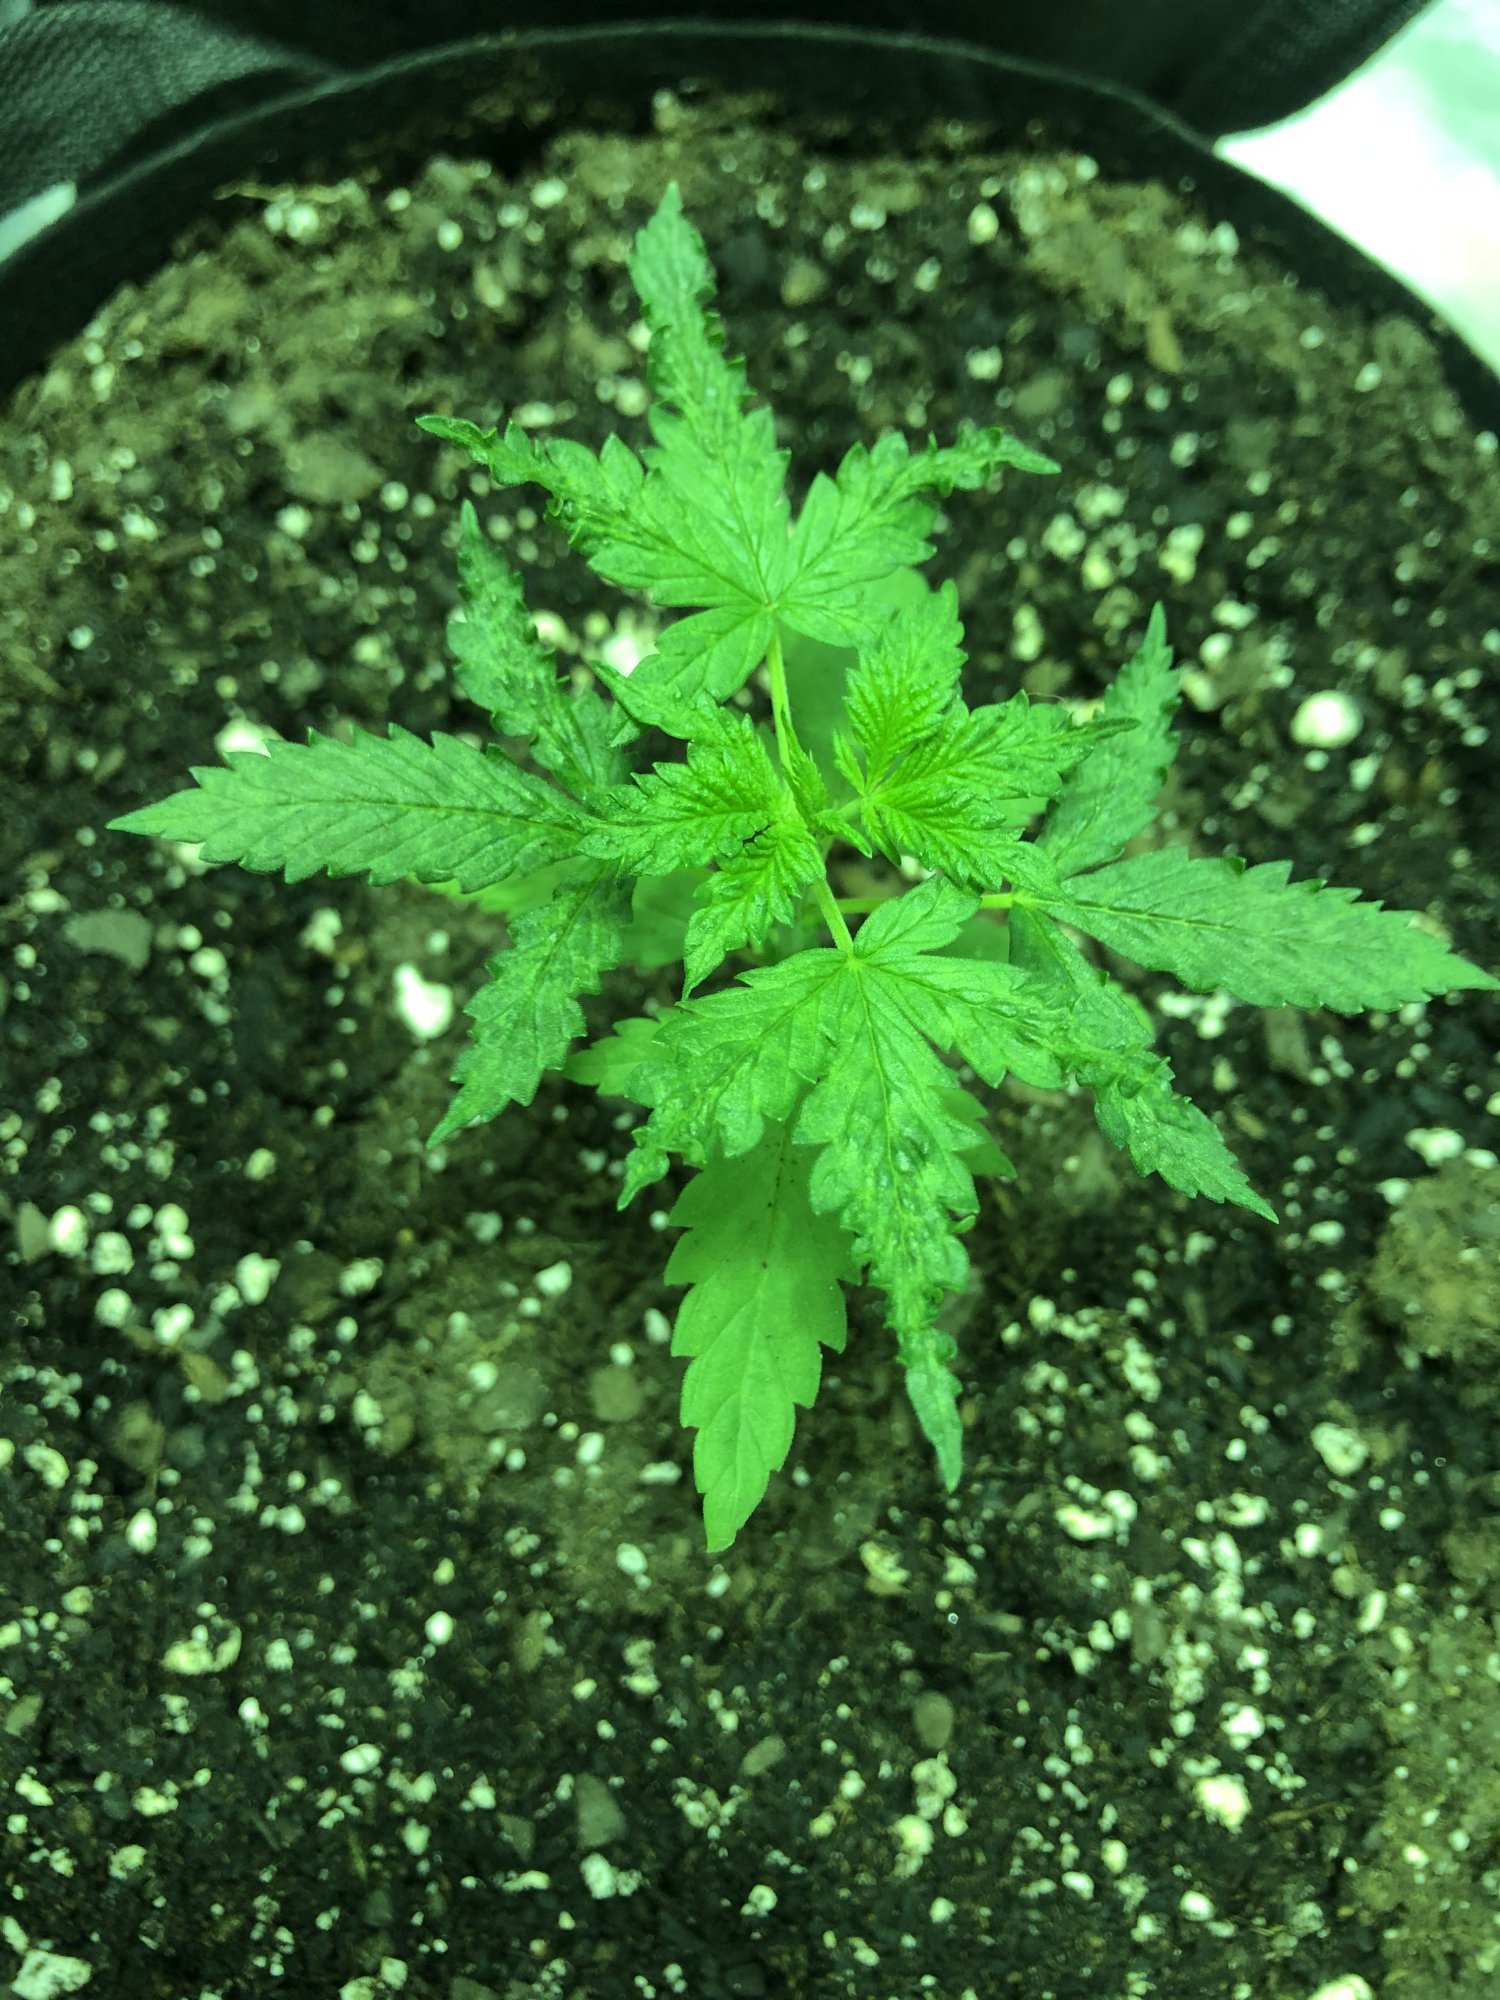 Could this be a deficiency